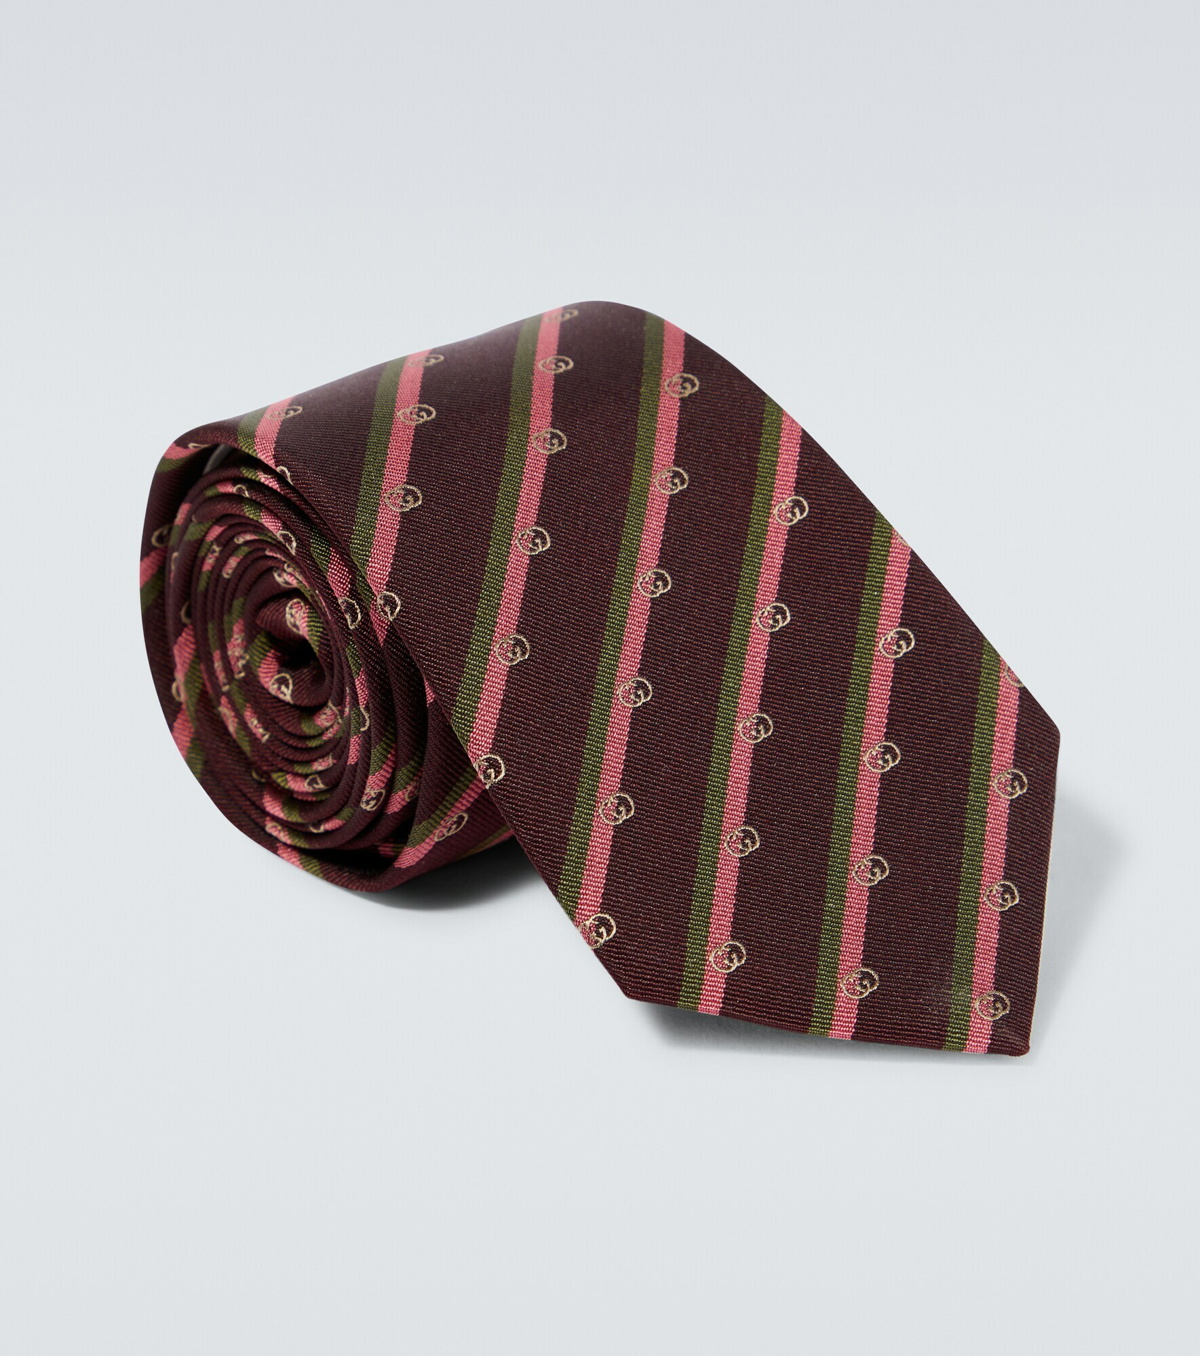 Pre-tied Gucci bowtieavailable at www.moderndaymogul.com